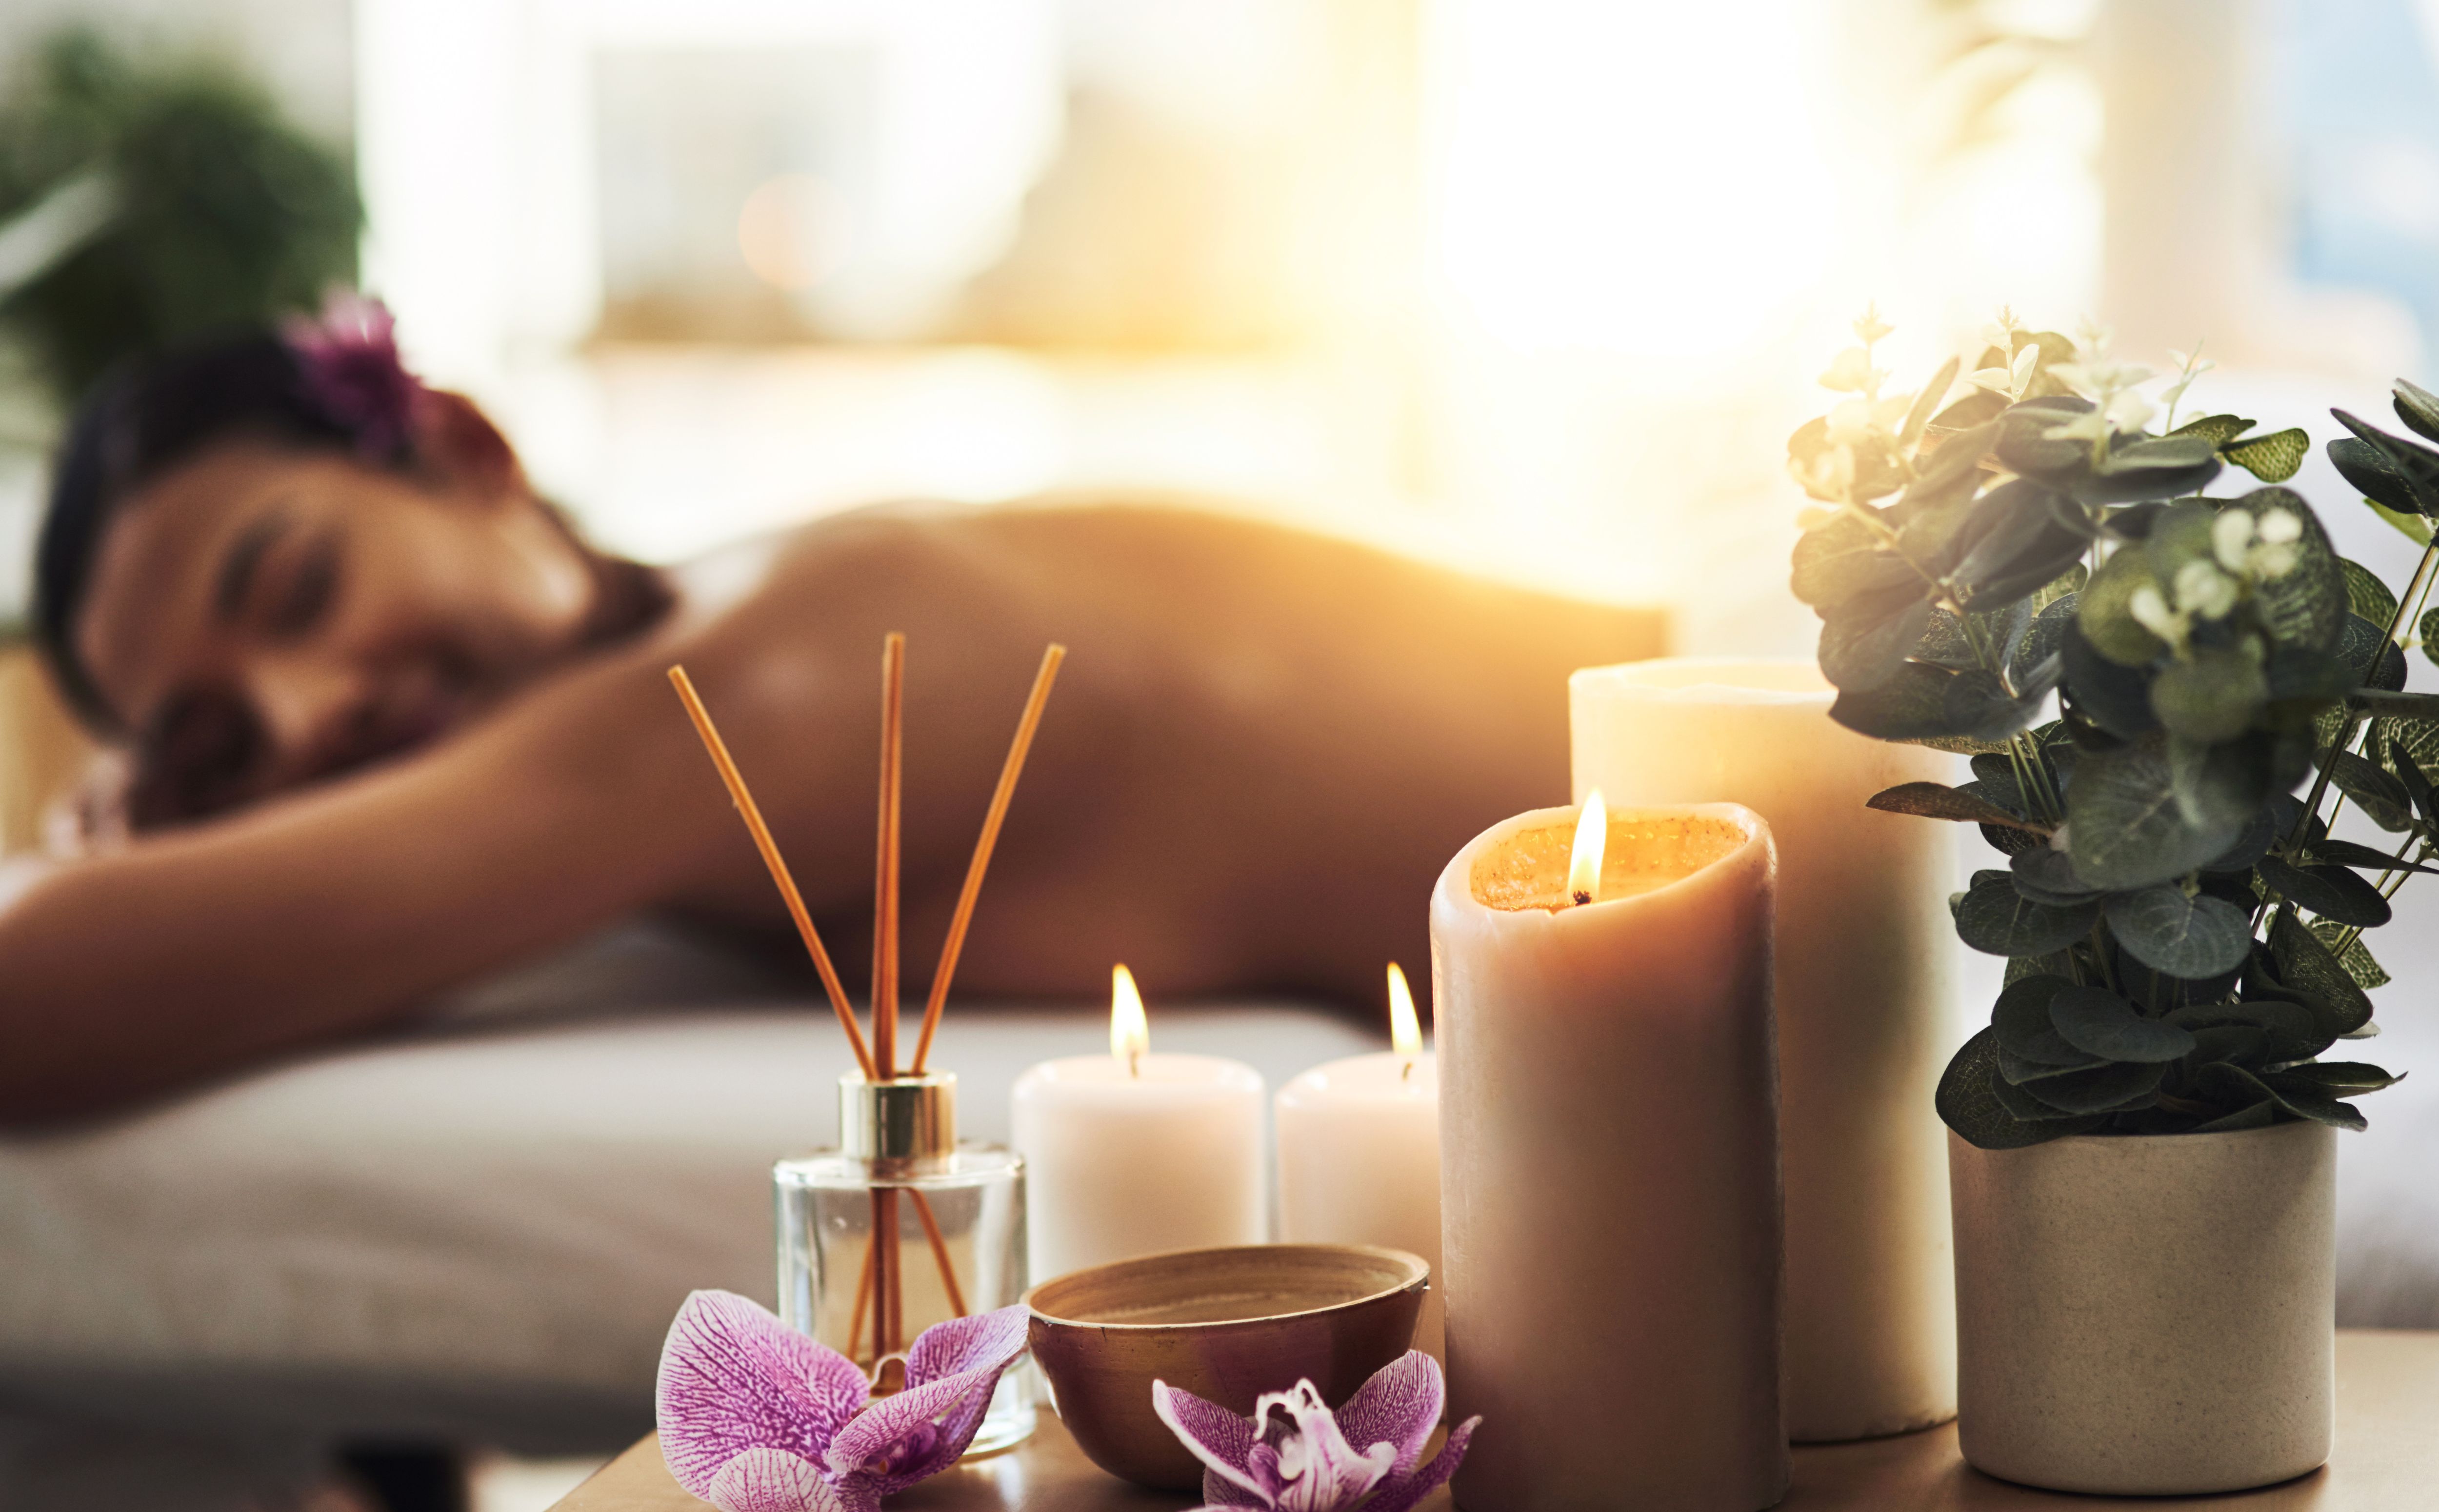 Women relaxing on a massage bed next to candles.